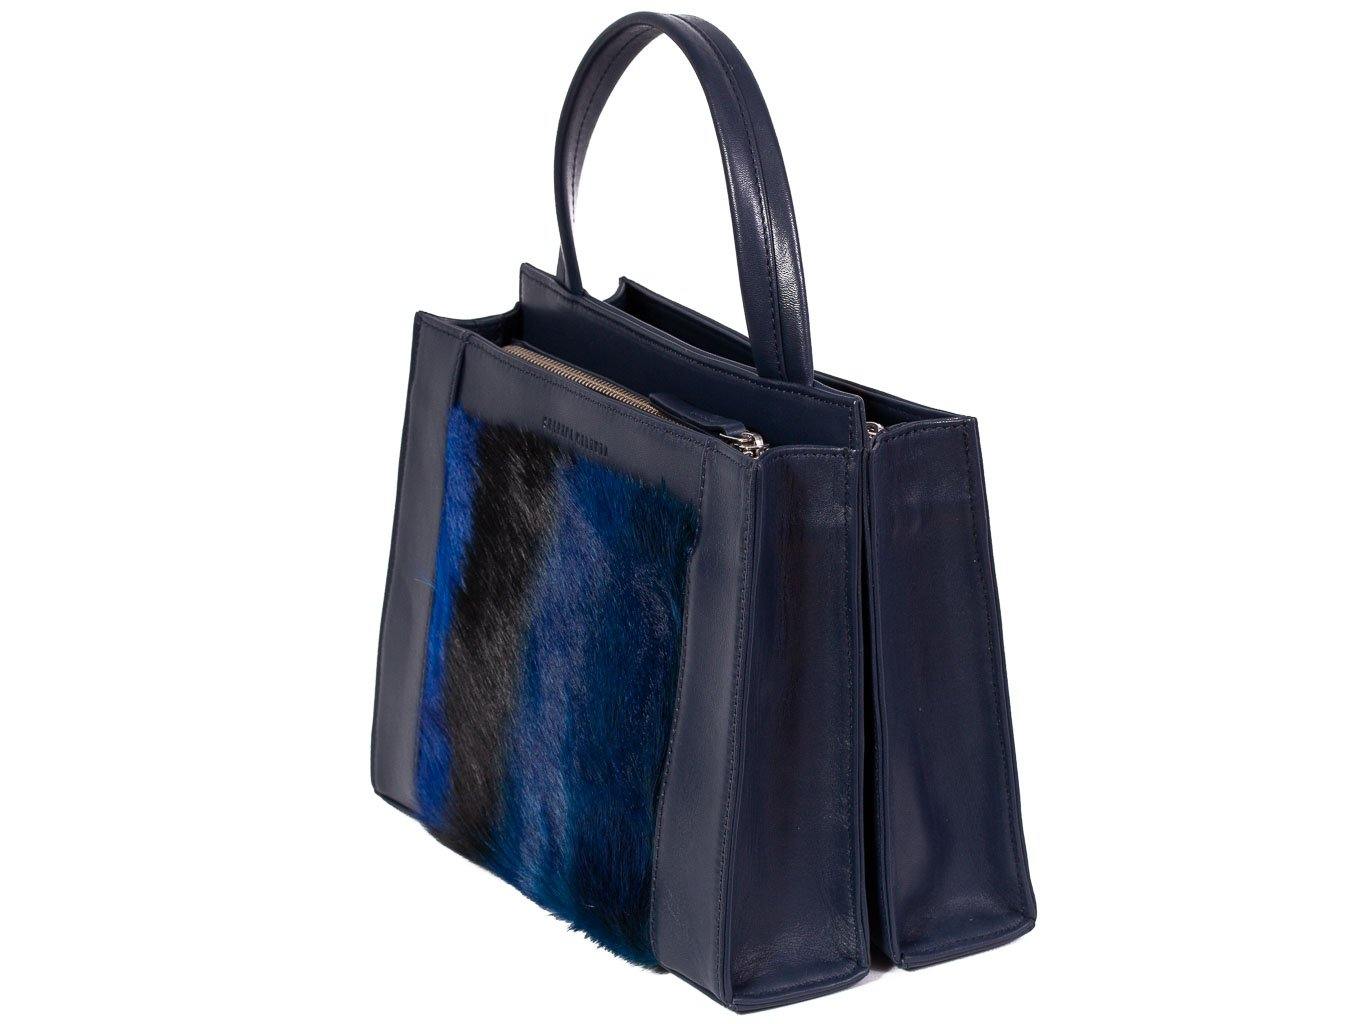 Top Handle Springbok Handbag in Navy Blue with a stripe feature by Sherene Melinda front